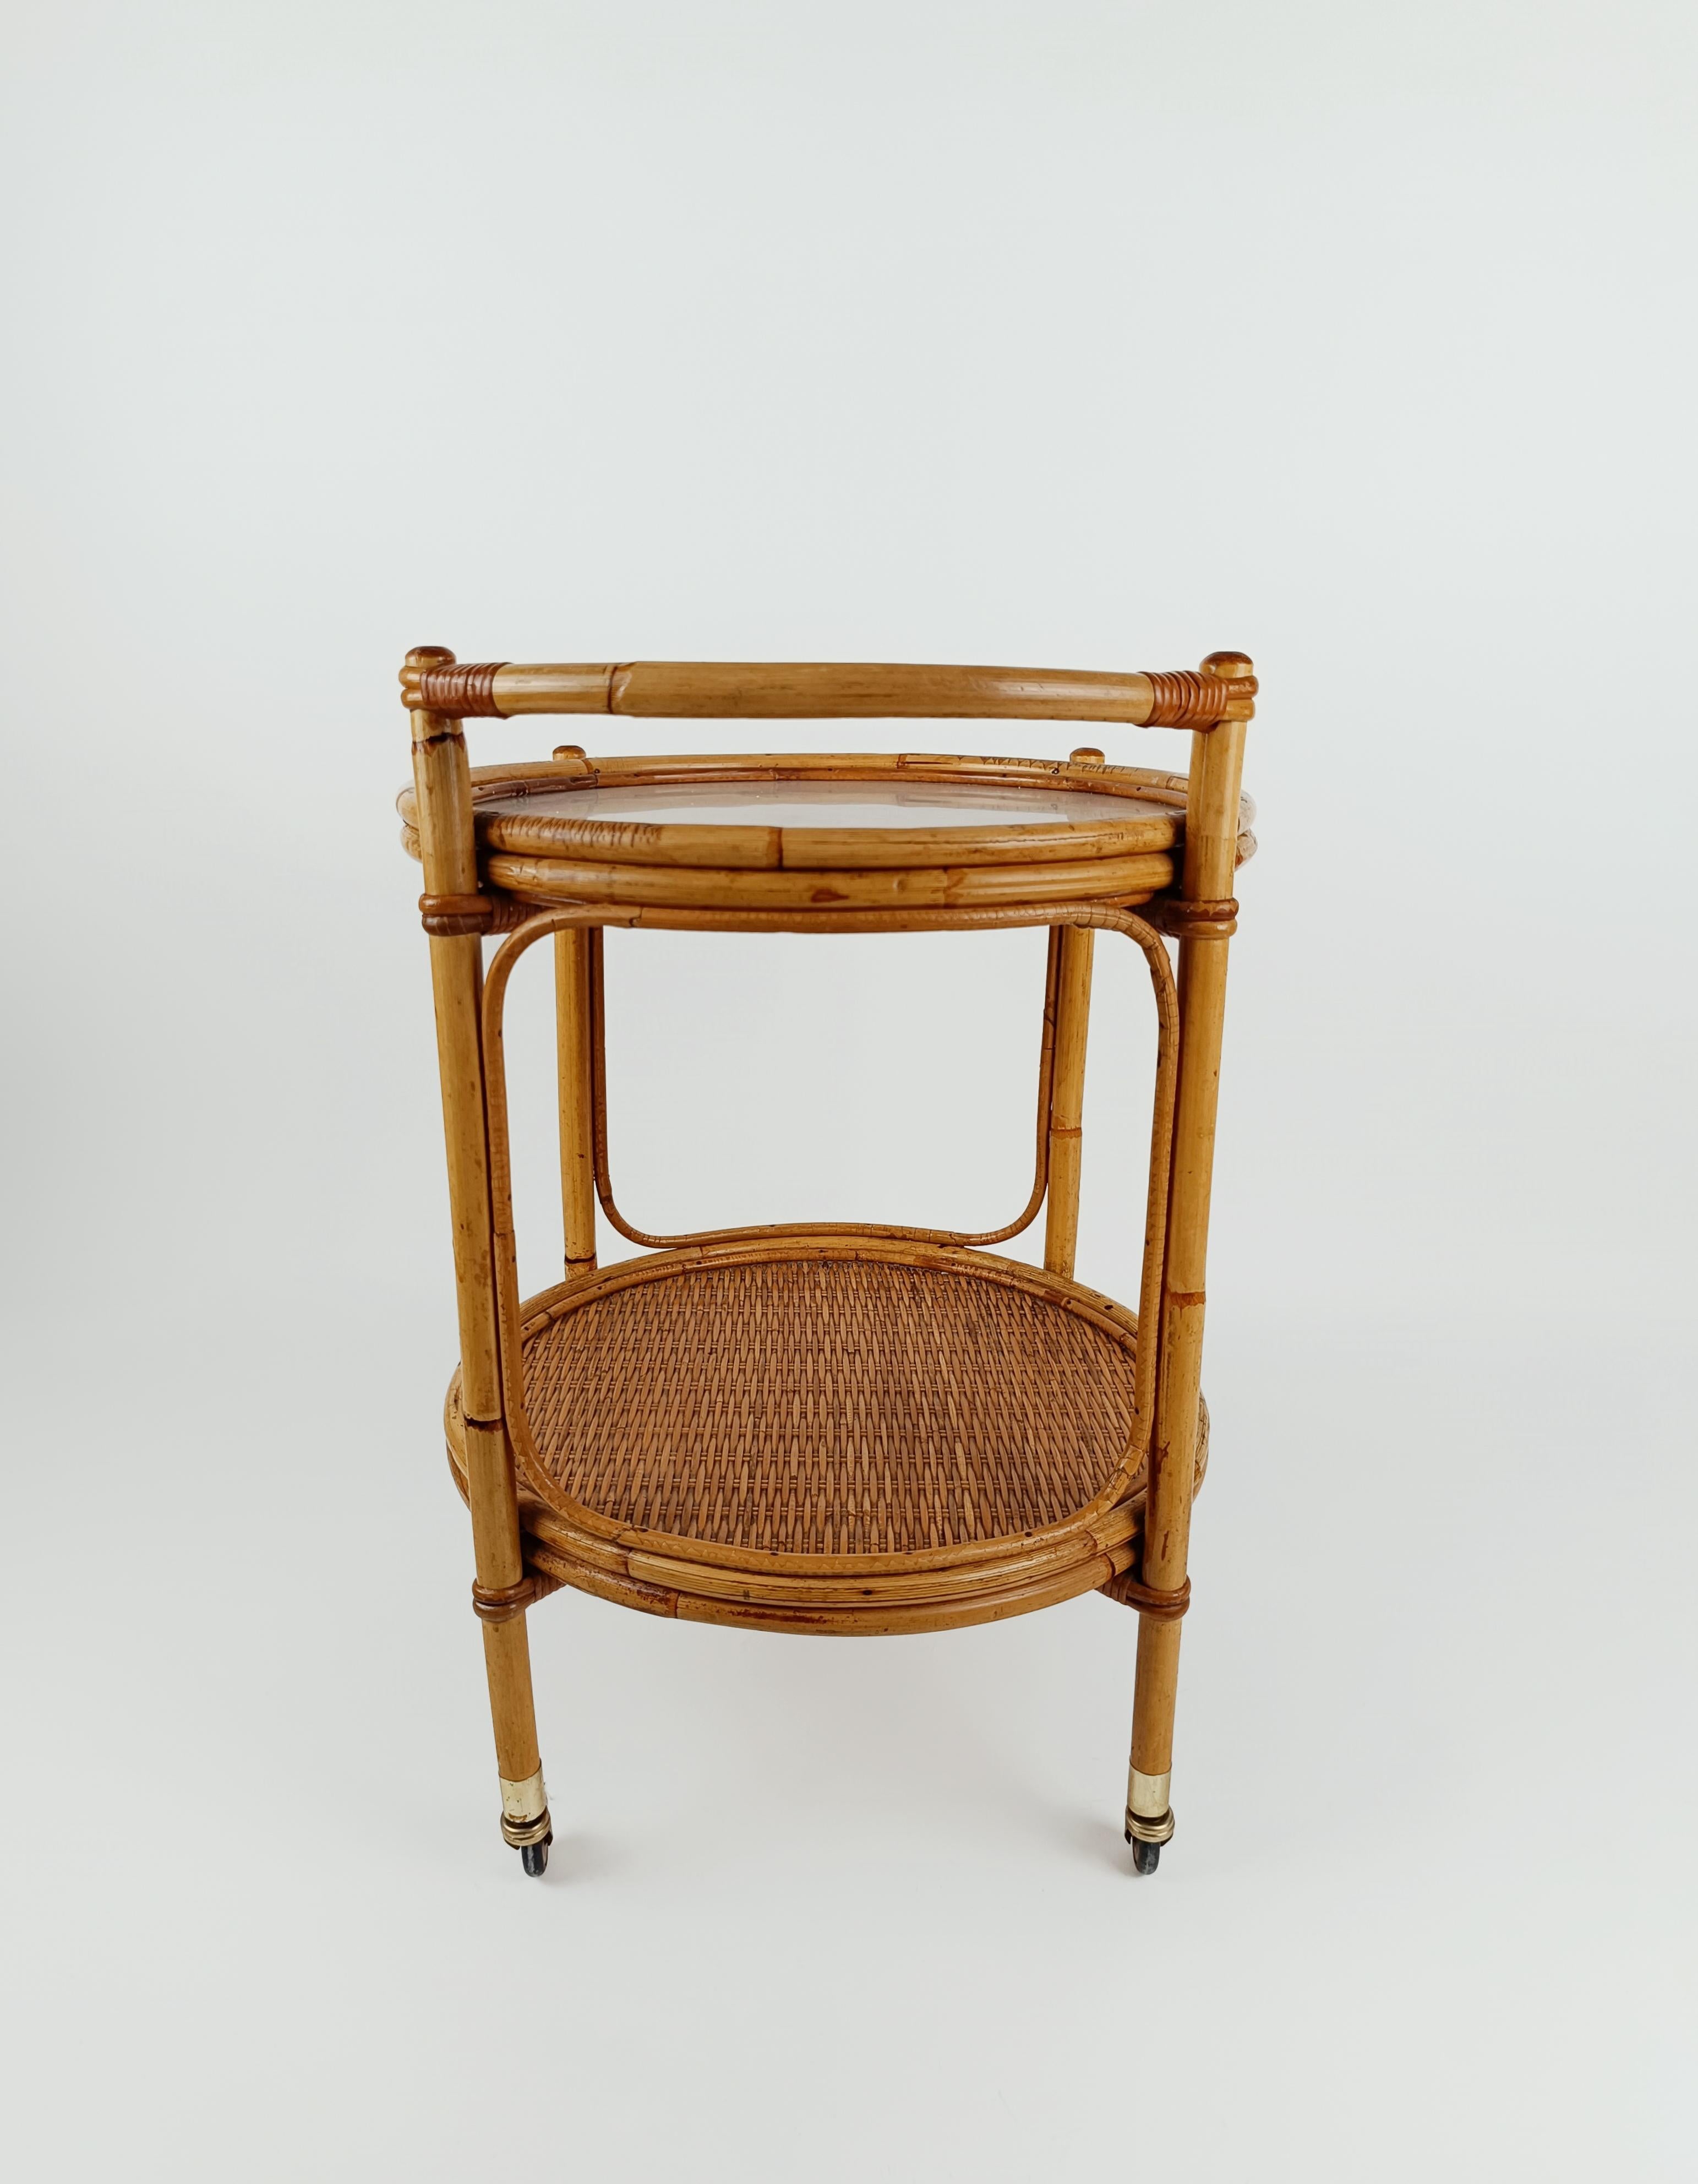 Mid 20th Century Round Serving Bar Cart Trolley in Bamboo & Rattan Italy, 1960s For Sale 1